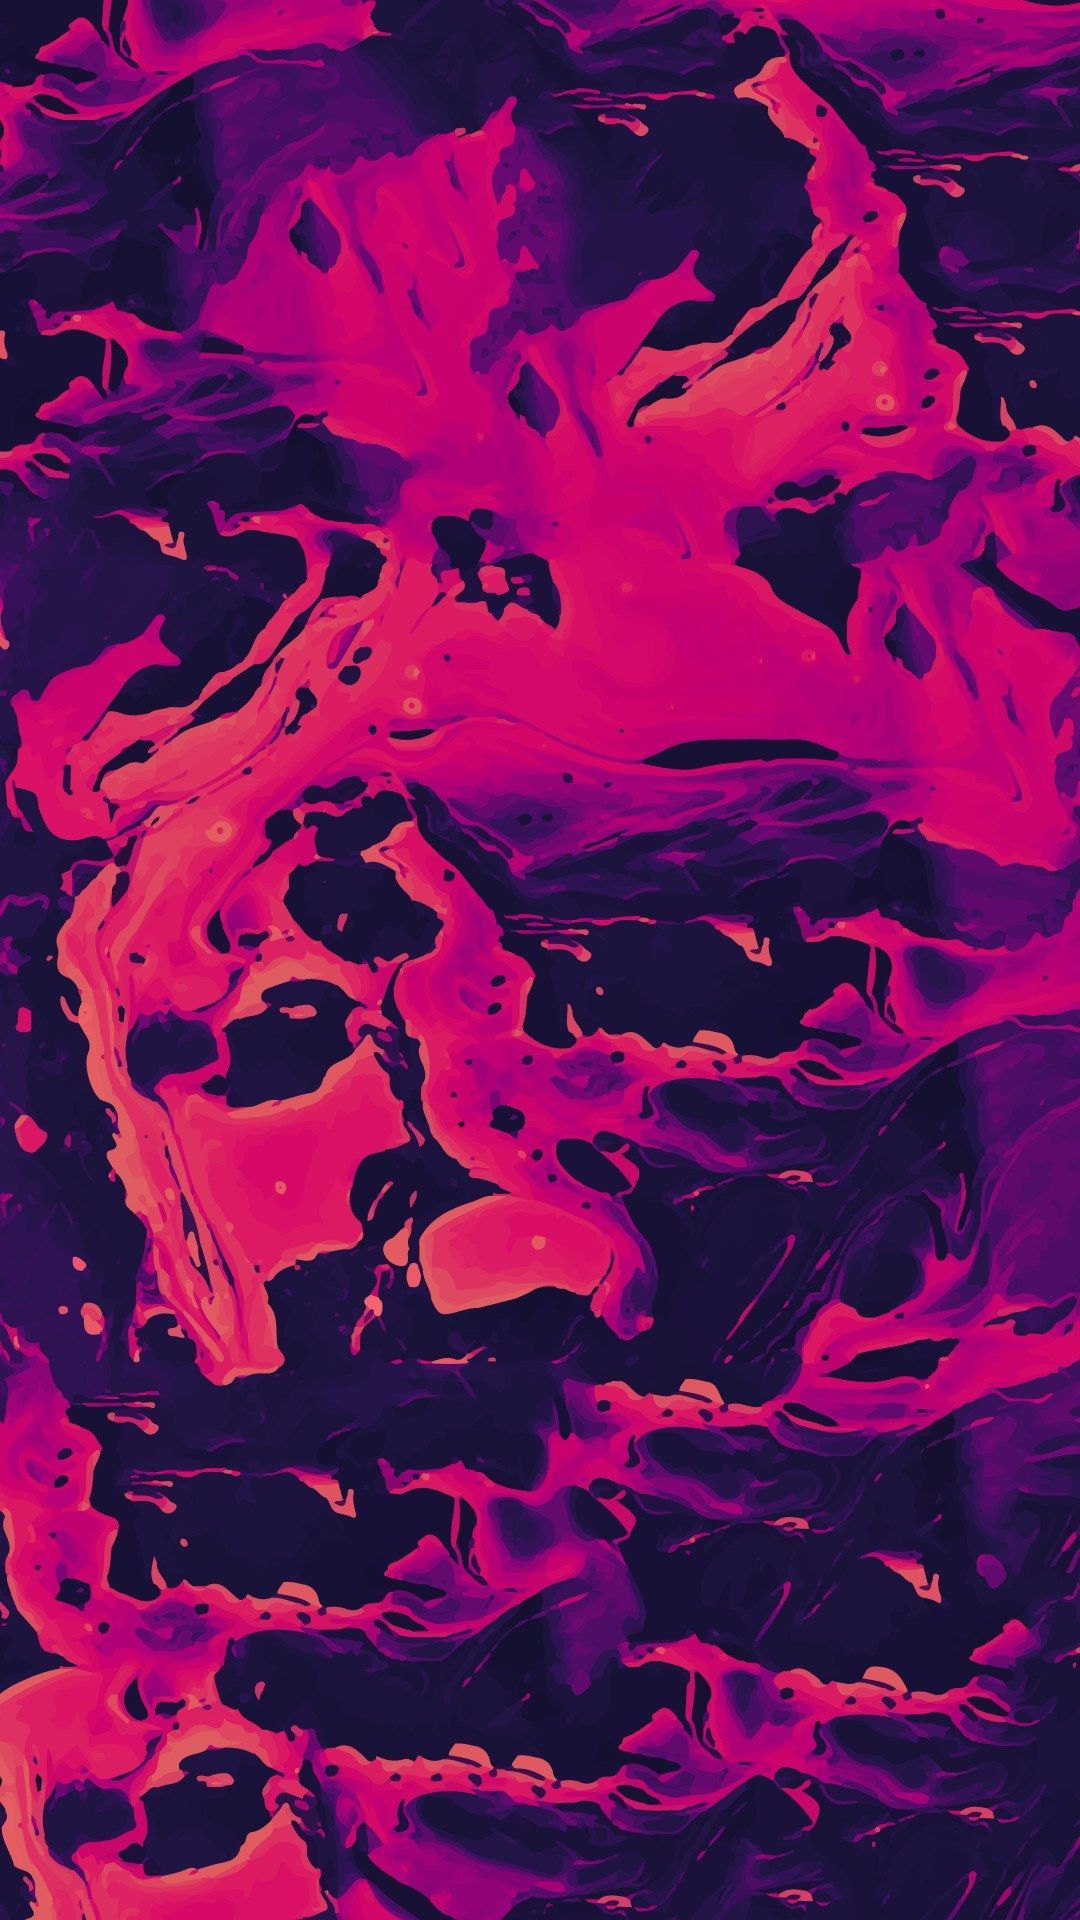 Oneplus 6T Abstract Wallpapers